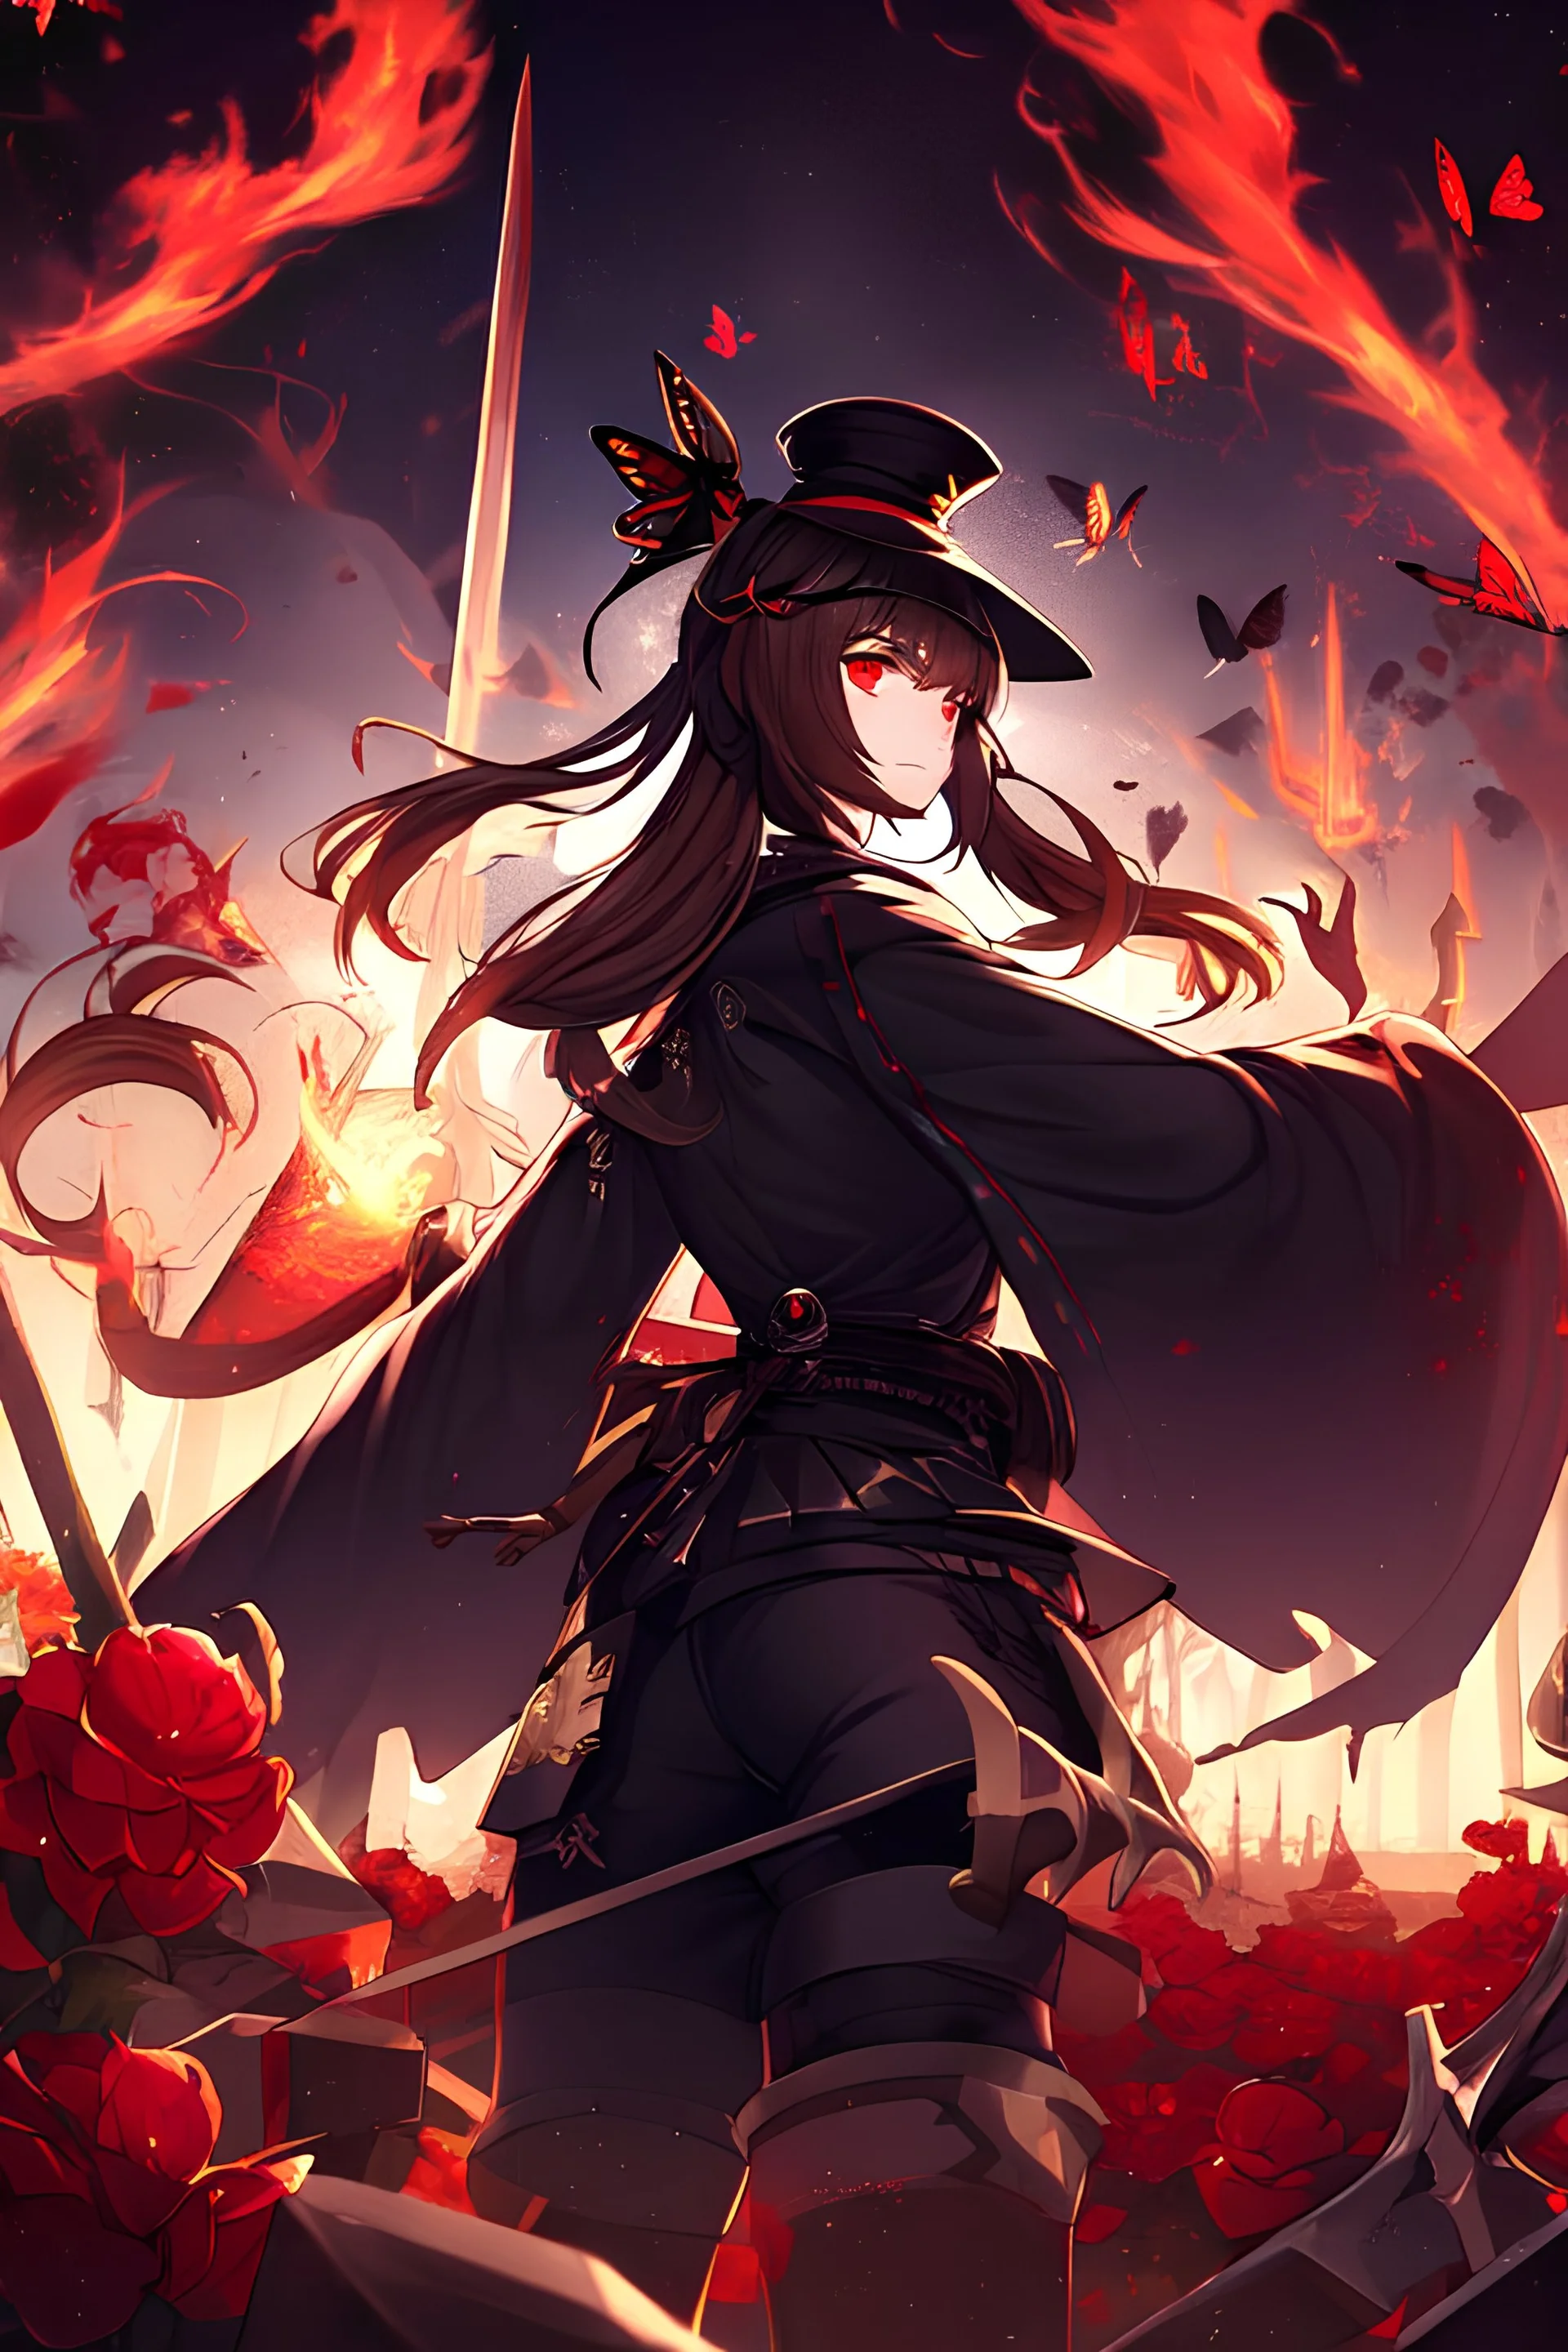 1girl, the soul of fire, magnificent and endless trial, brown hair, black bow hat, two long ponytails back, red eyes, black nails, black shorts, wide black sleeves, rings on fingers, spear in hand, gloominess, darkness, broken, red flowers and butterflies, night landscape, graveyard